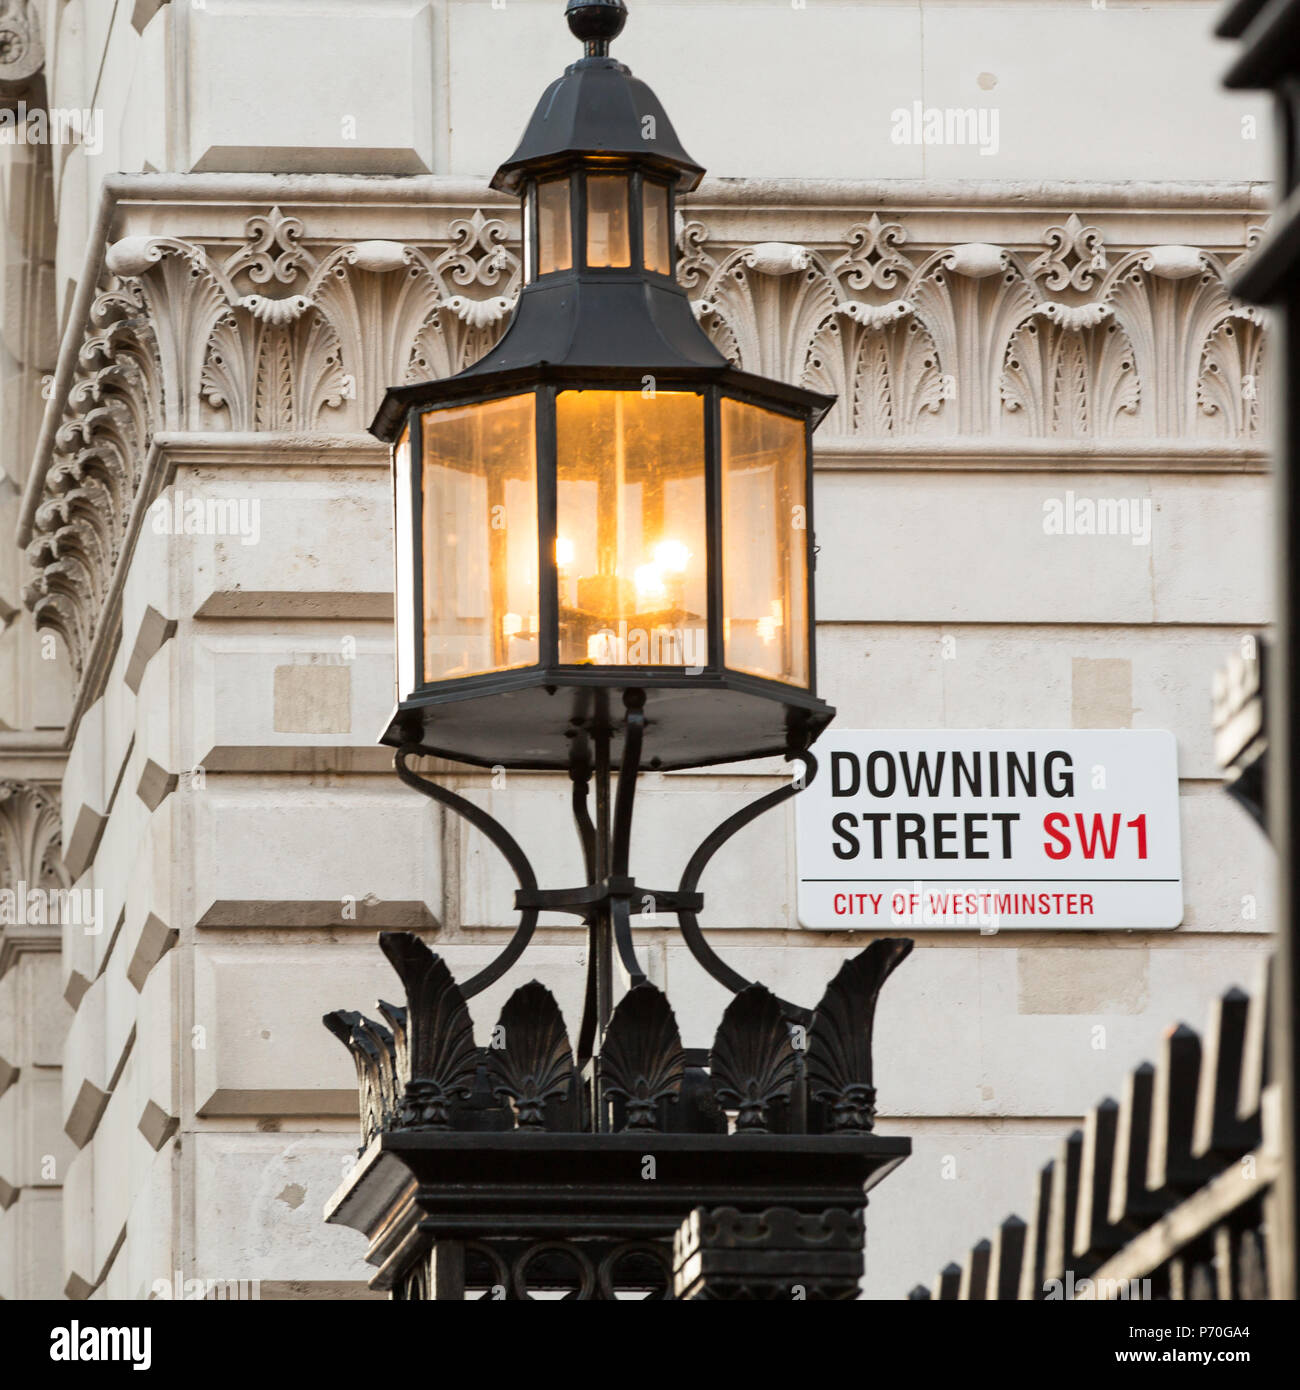 London, UK - 20th November 2013: The iconic sign for Dowing Street, Westminster.  Number 10 is the official residence of the Prime Minister. In London Stock Photo